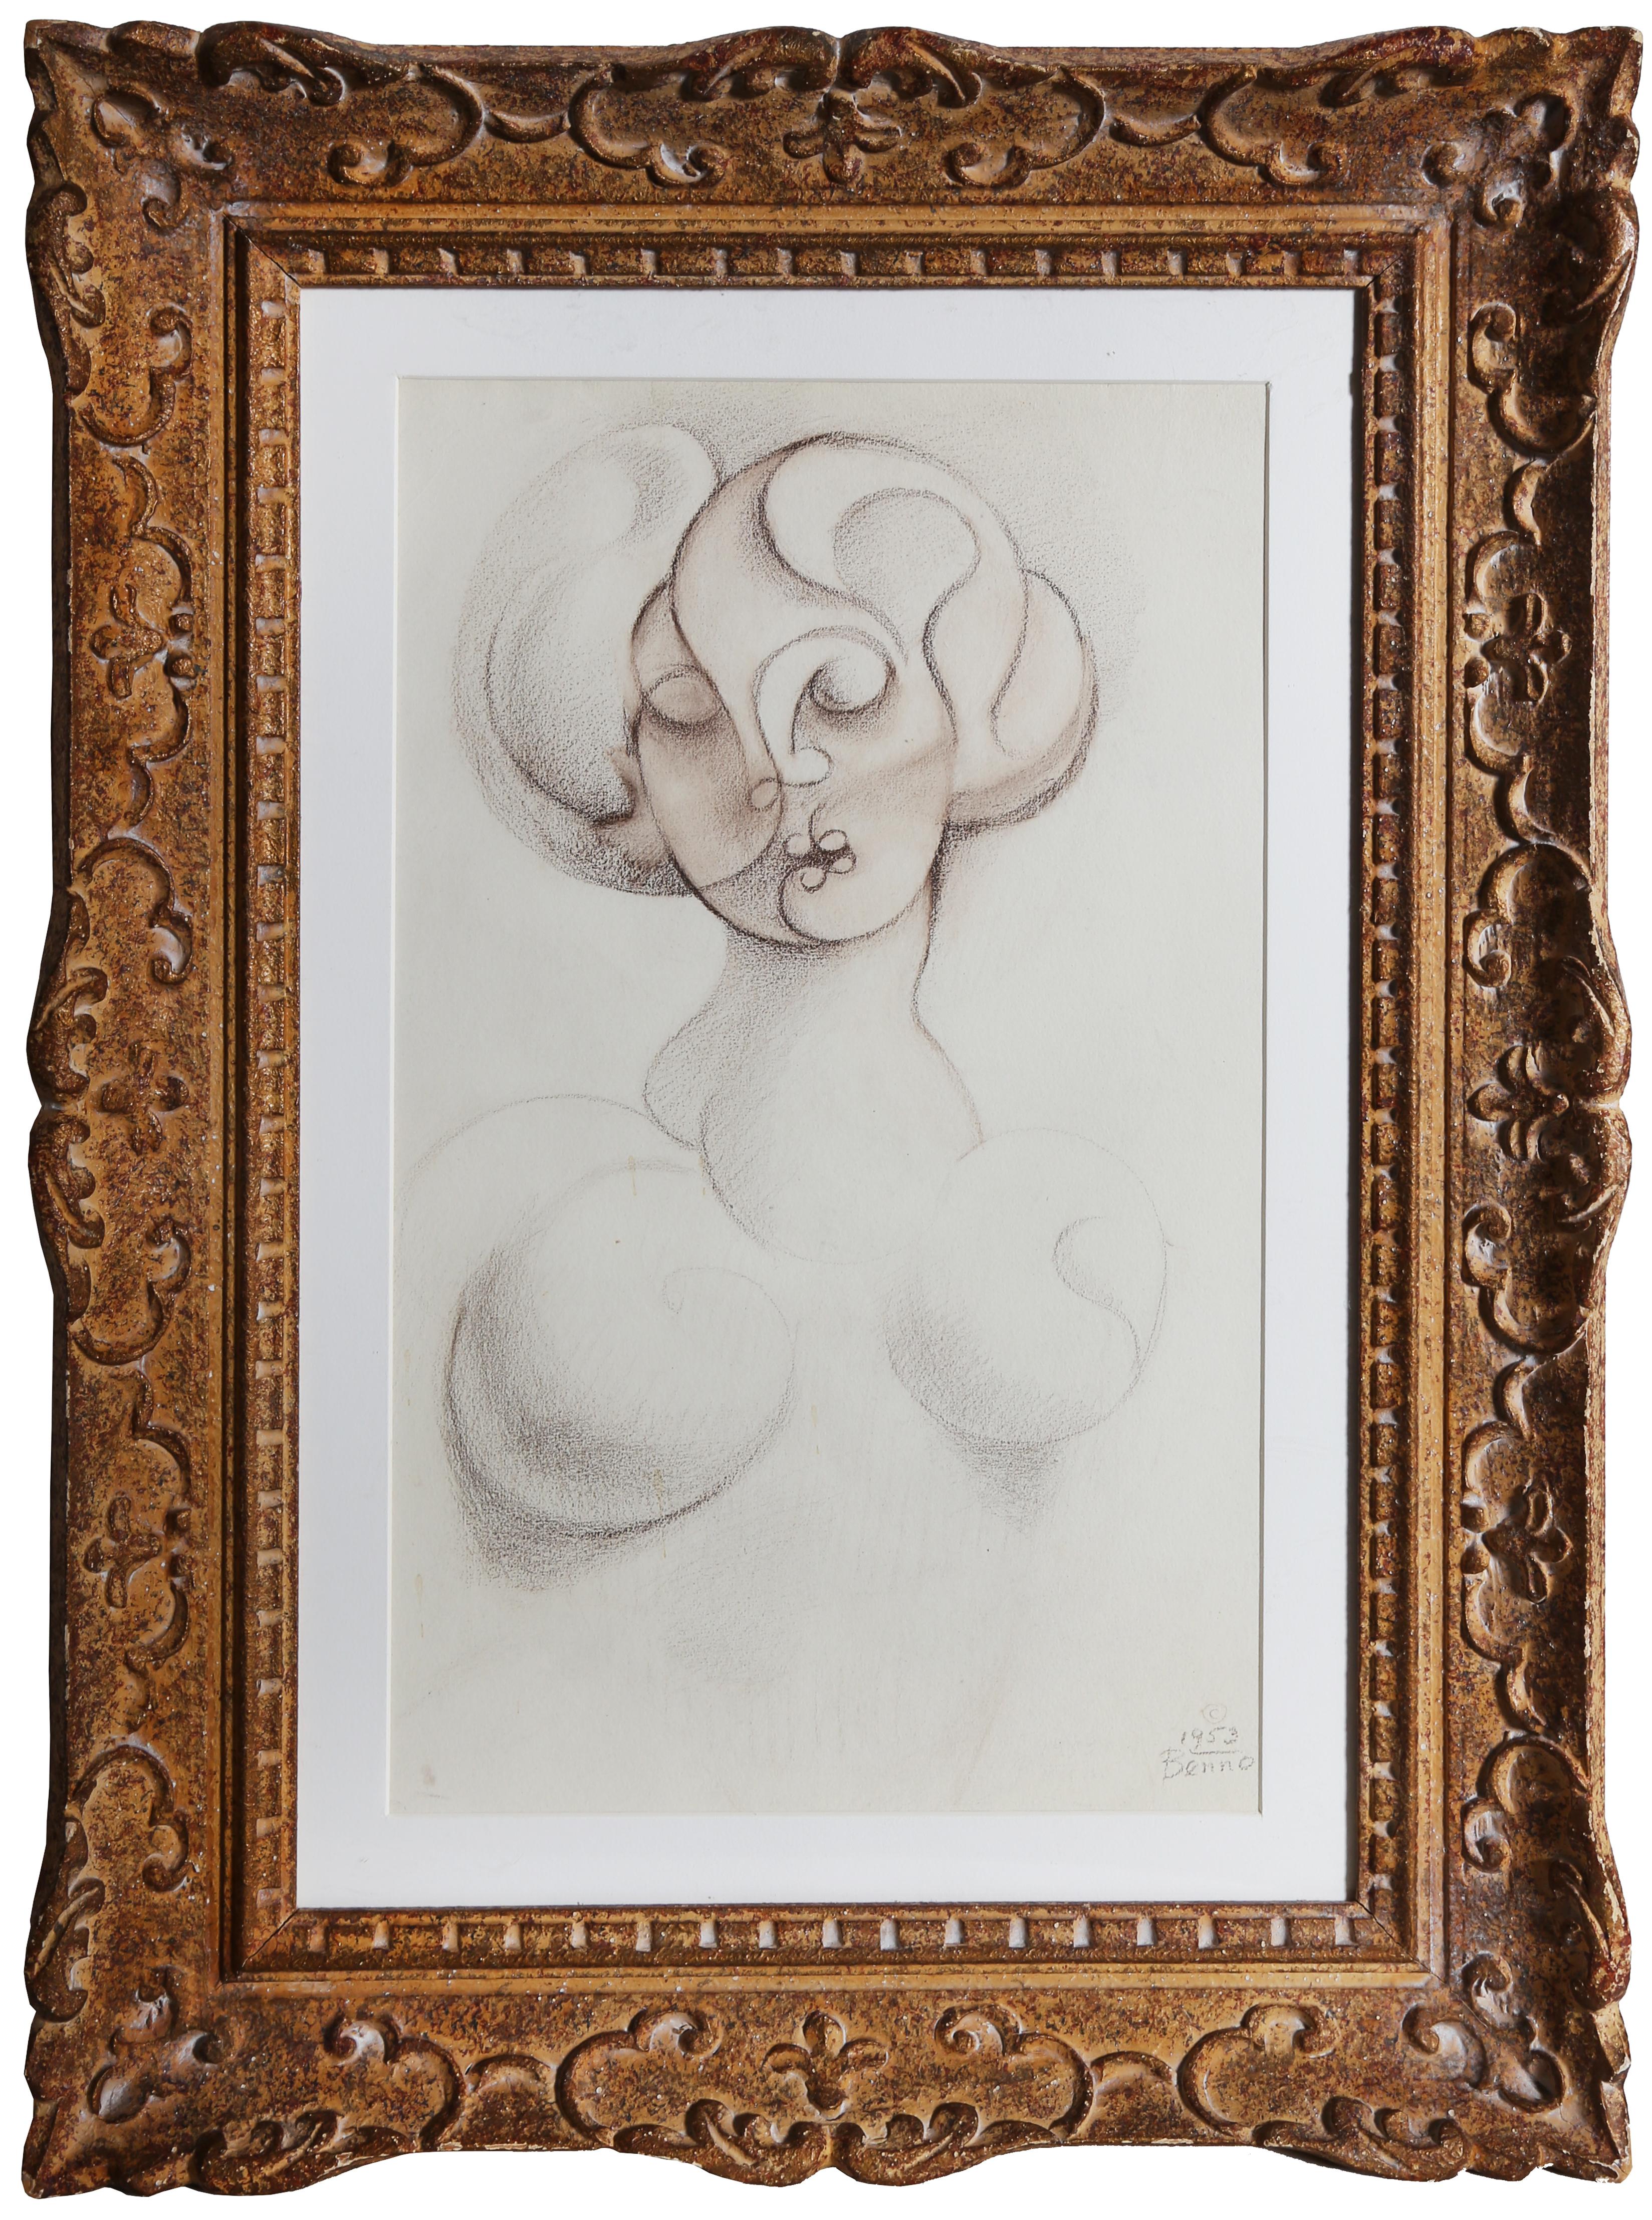 Portrait of a Woman, Cubist Charcoal and Pastel Drawing by Benjamin Benno